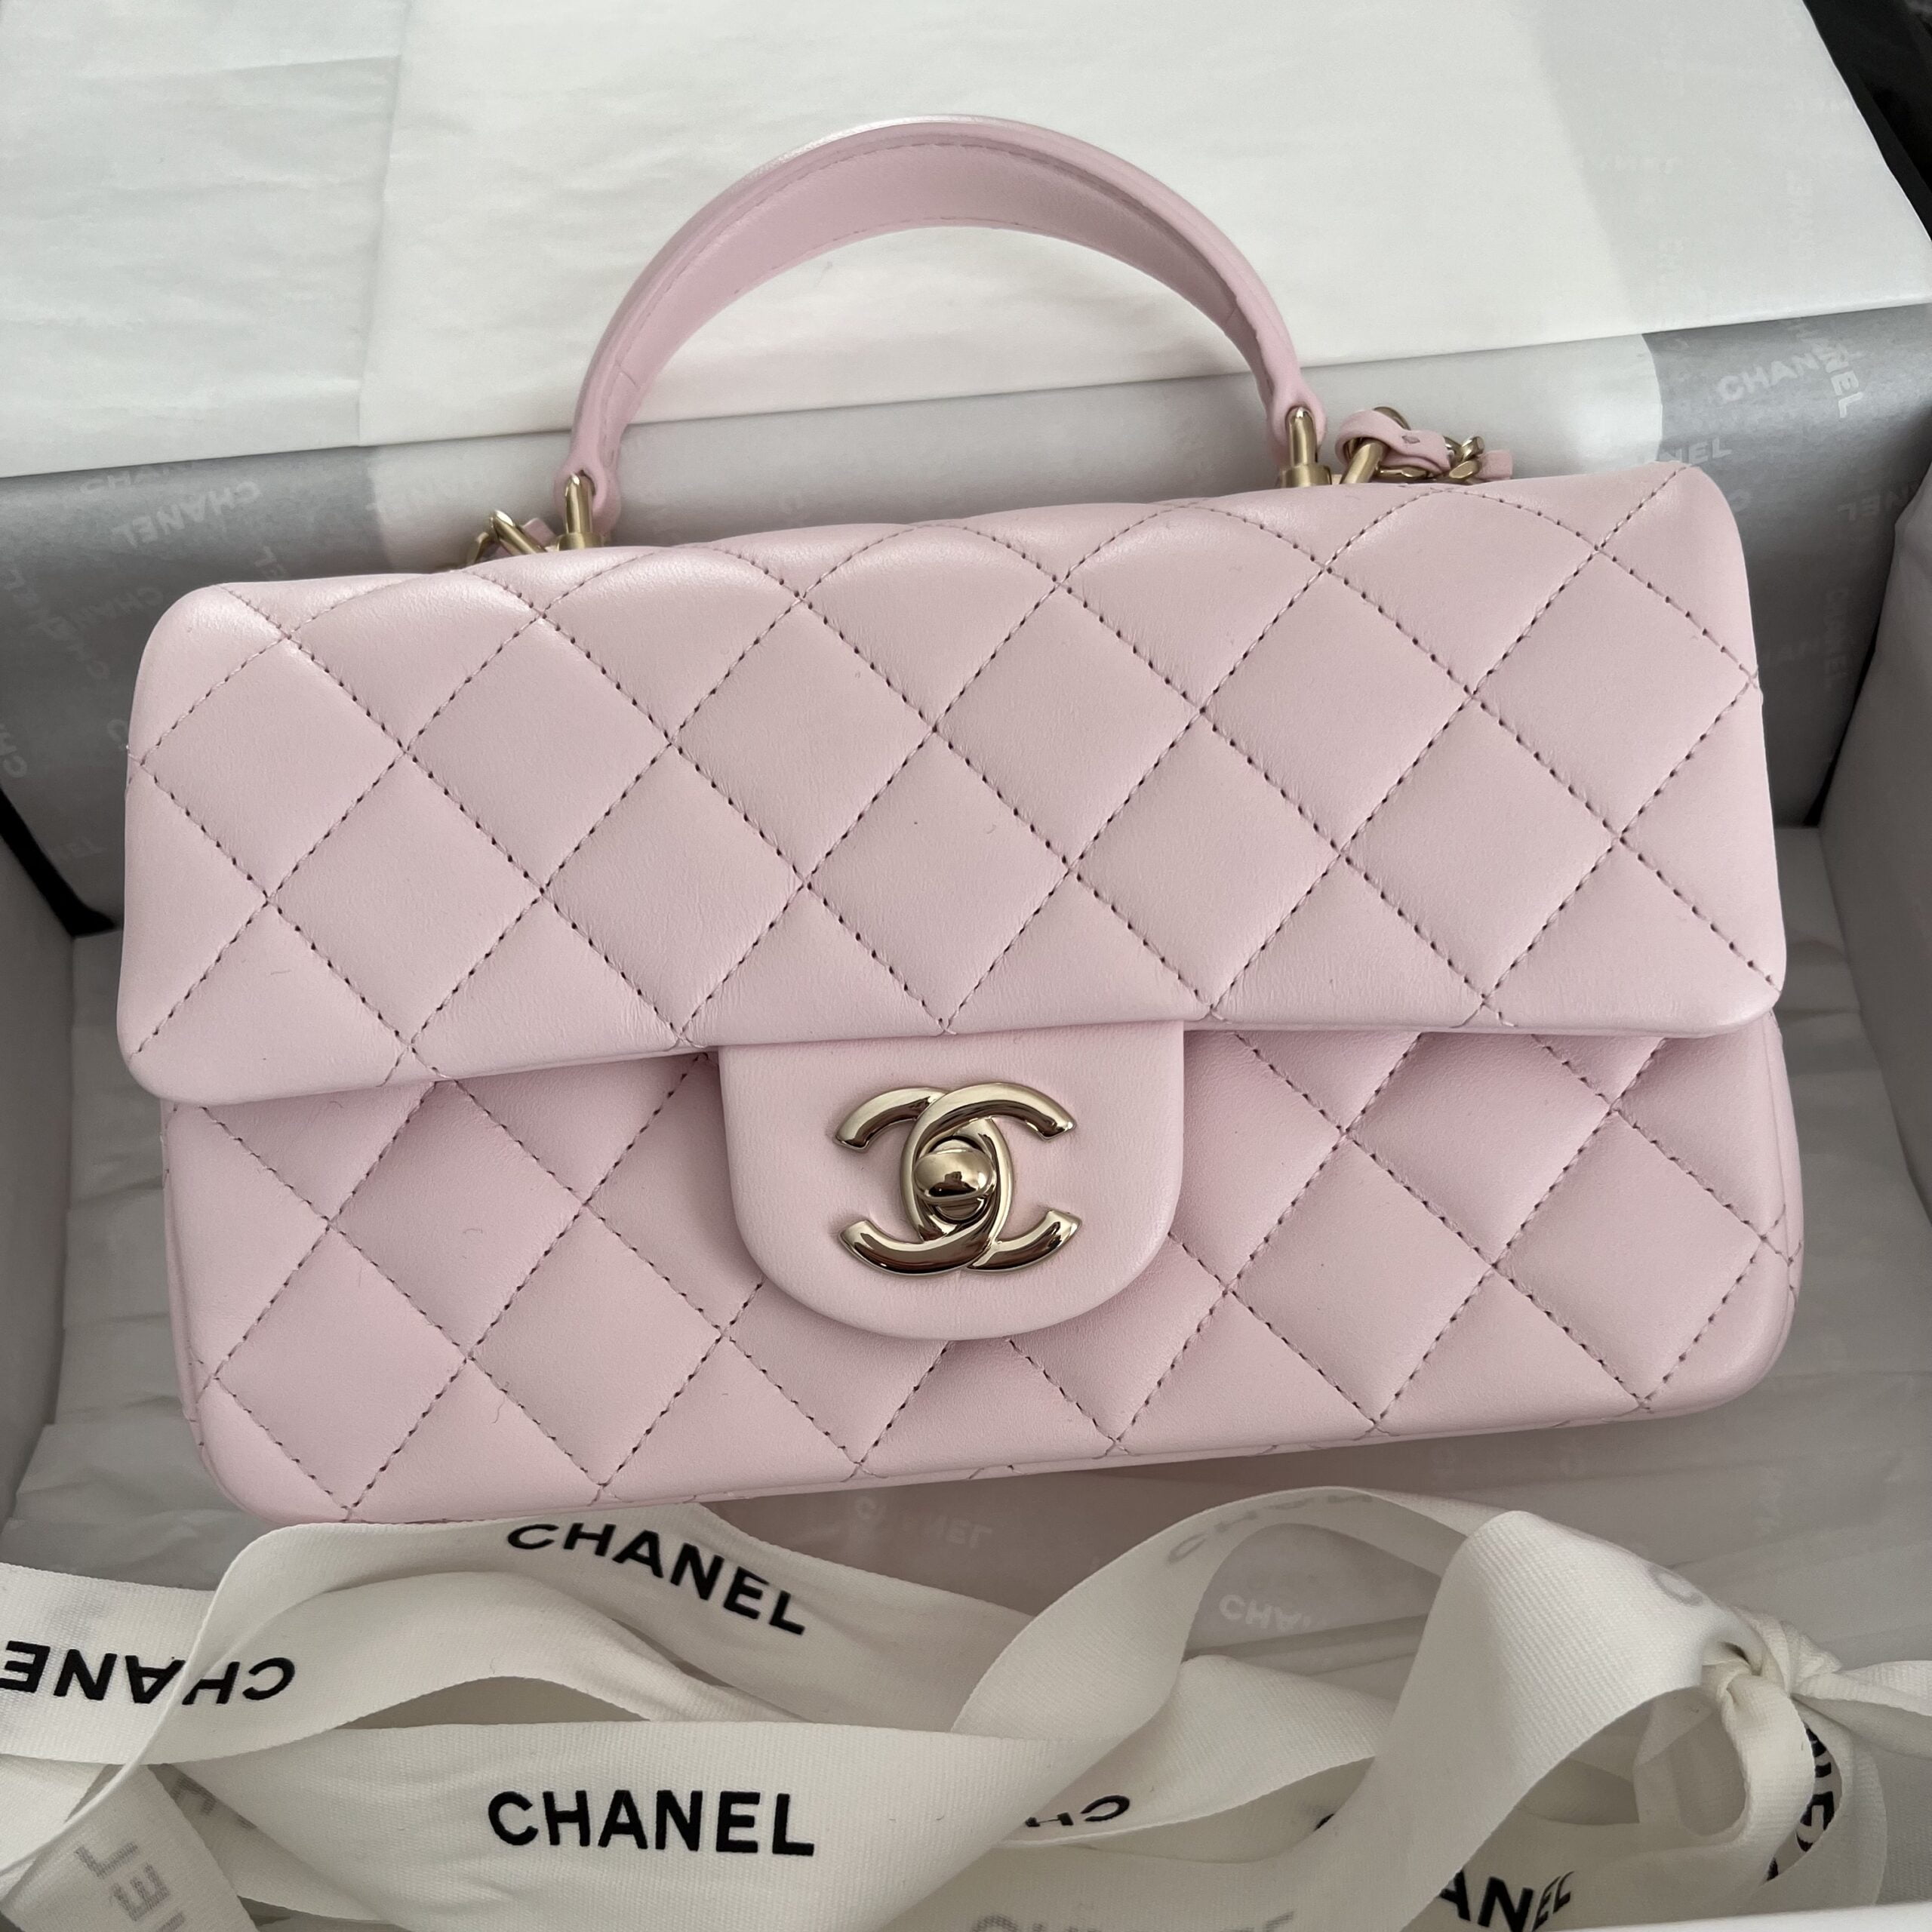 Help! Should I buy the Mini Flap Bag AUD7740 or Coco Handle AUD9130 from  the 23p collection? Also what are the prices in your country? : r/chanel